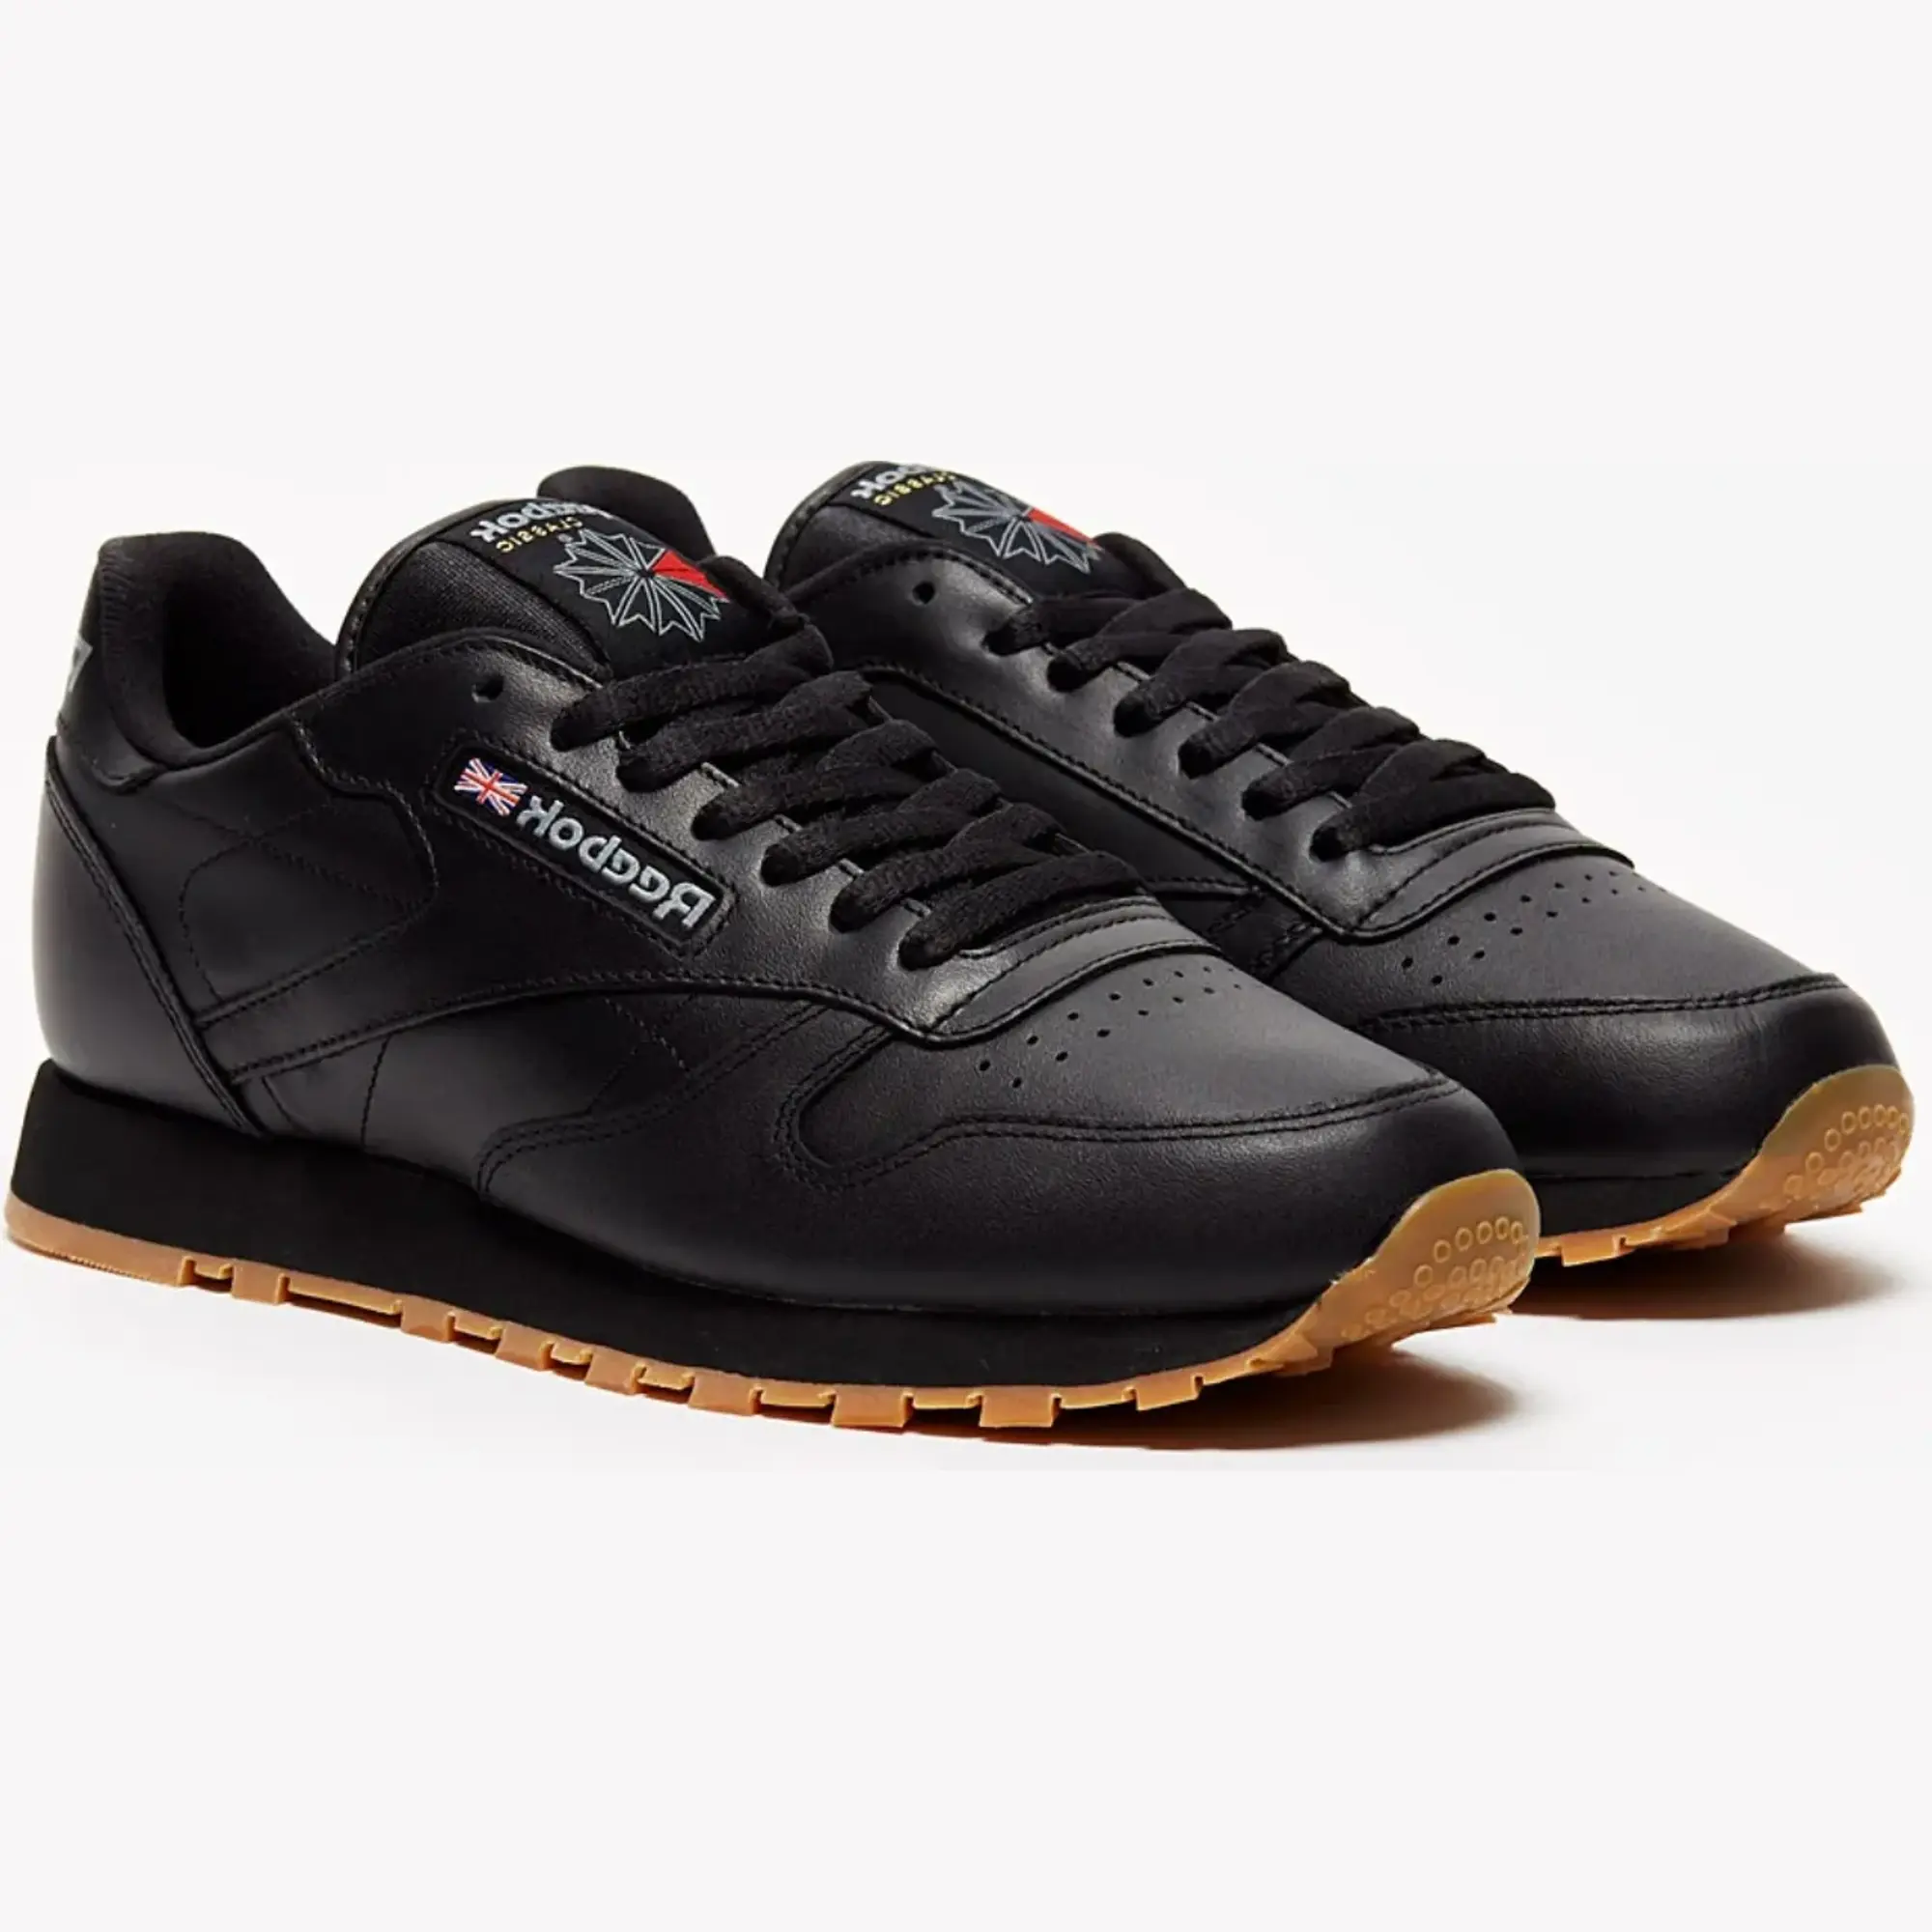 Reebok Classic Leather Mens Trainers - Black